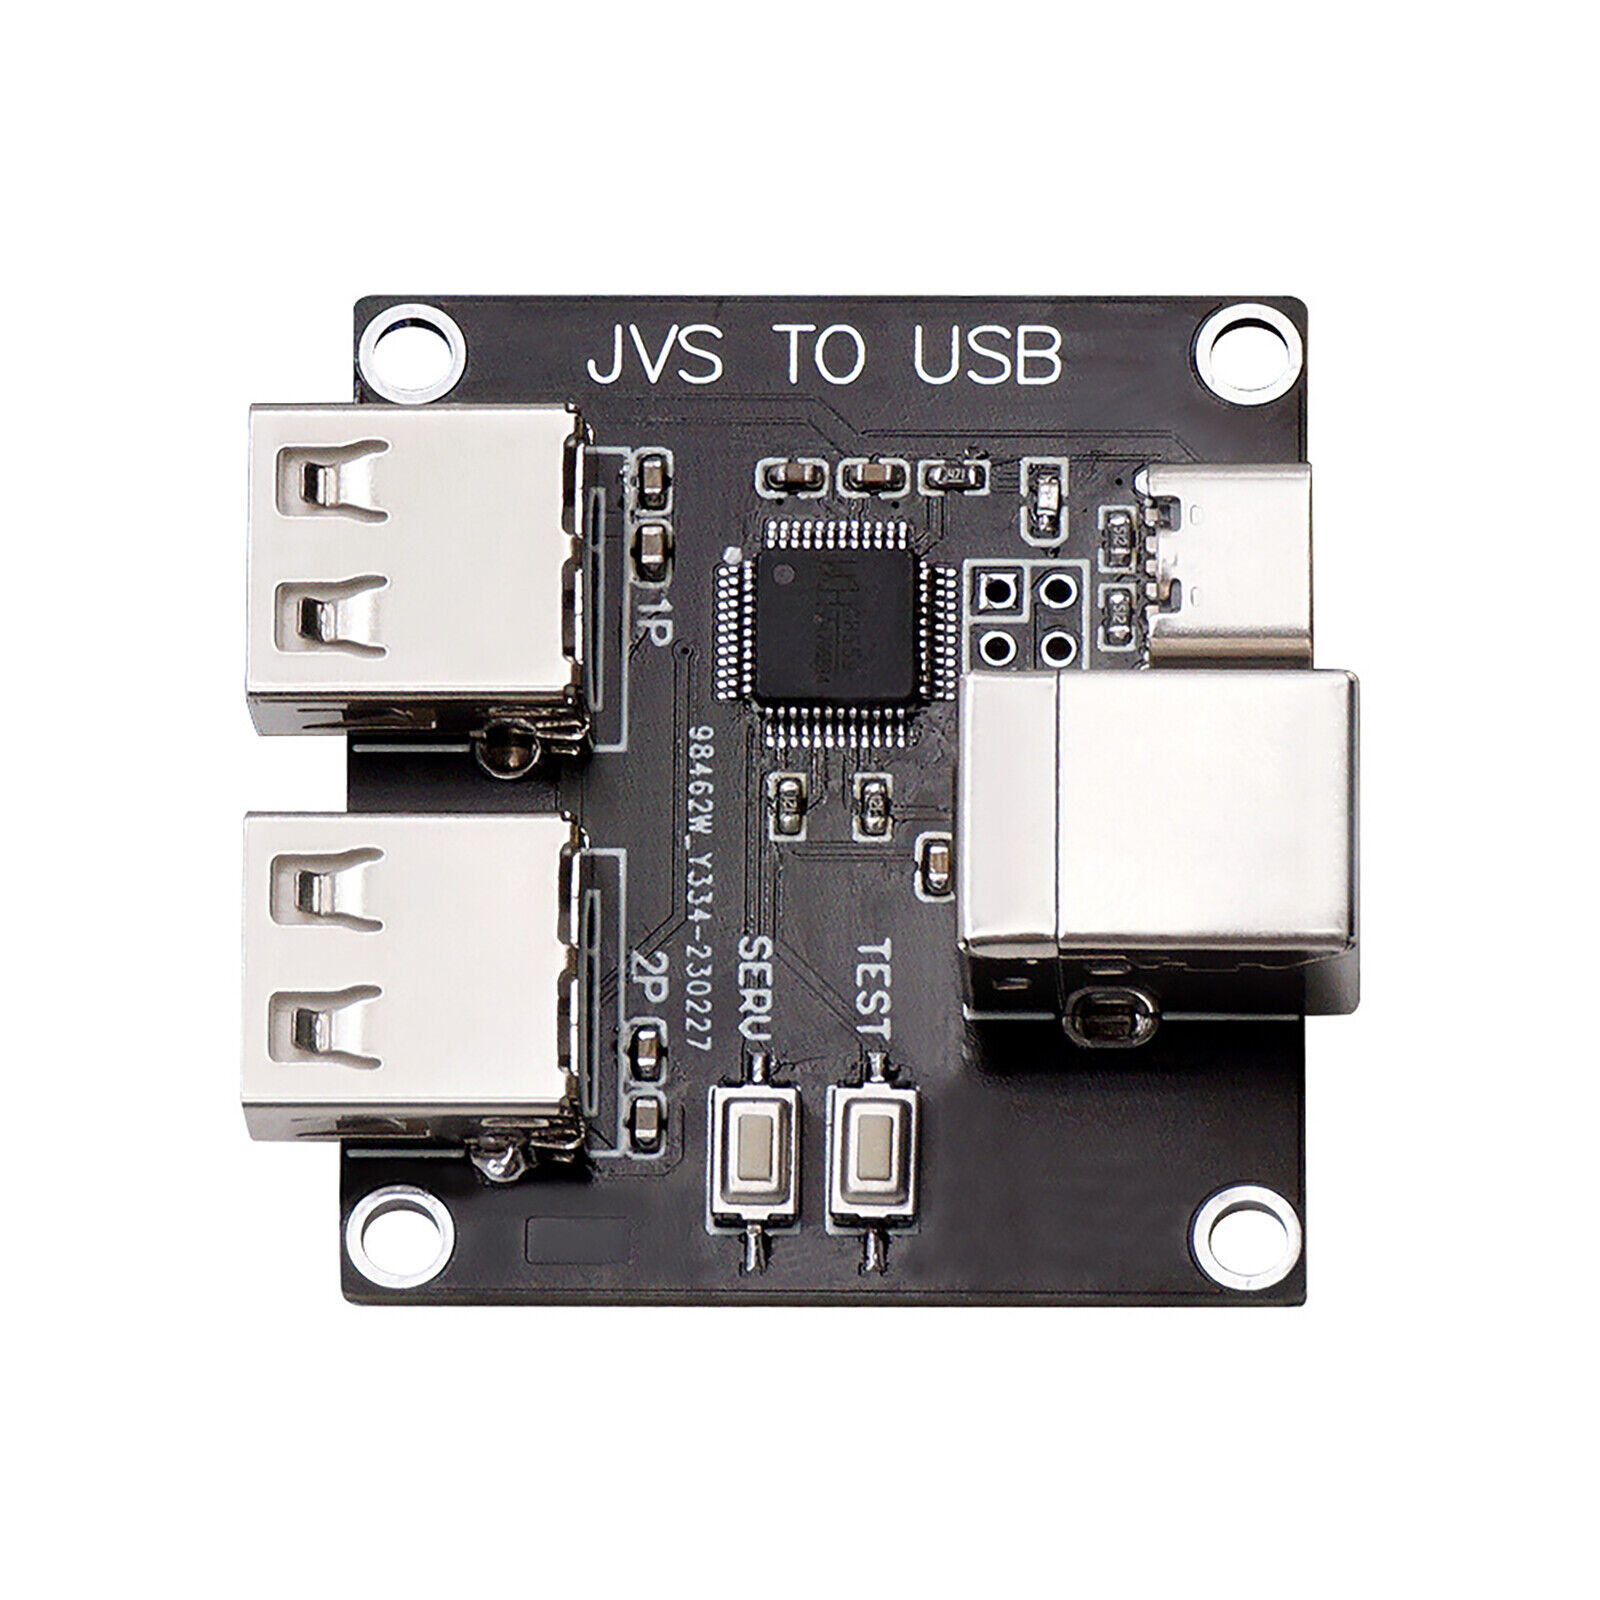 JVS to USB Converter MP07- IONA-US for 360/One Series/PS4/PS3